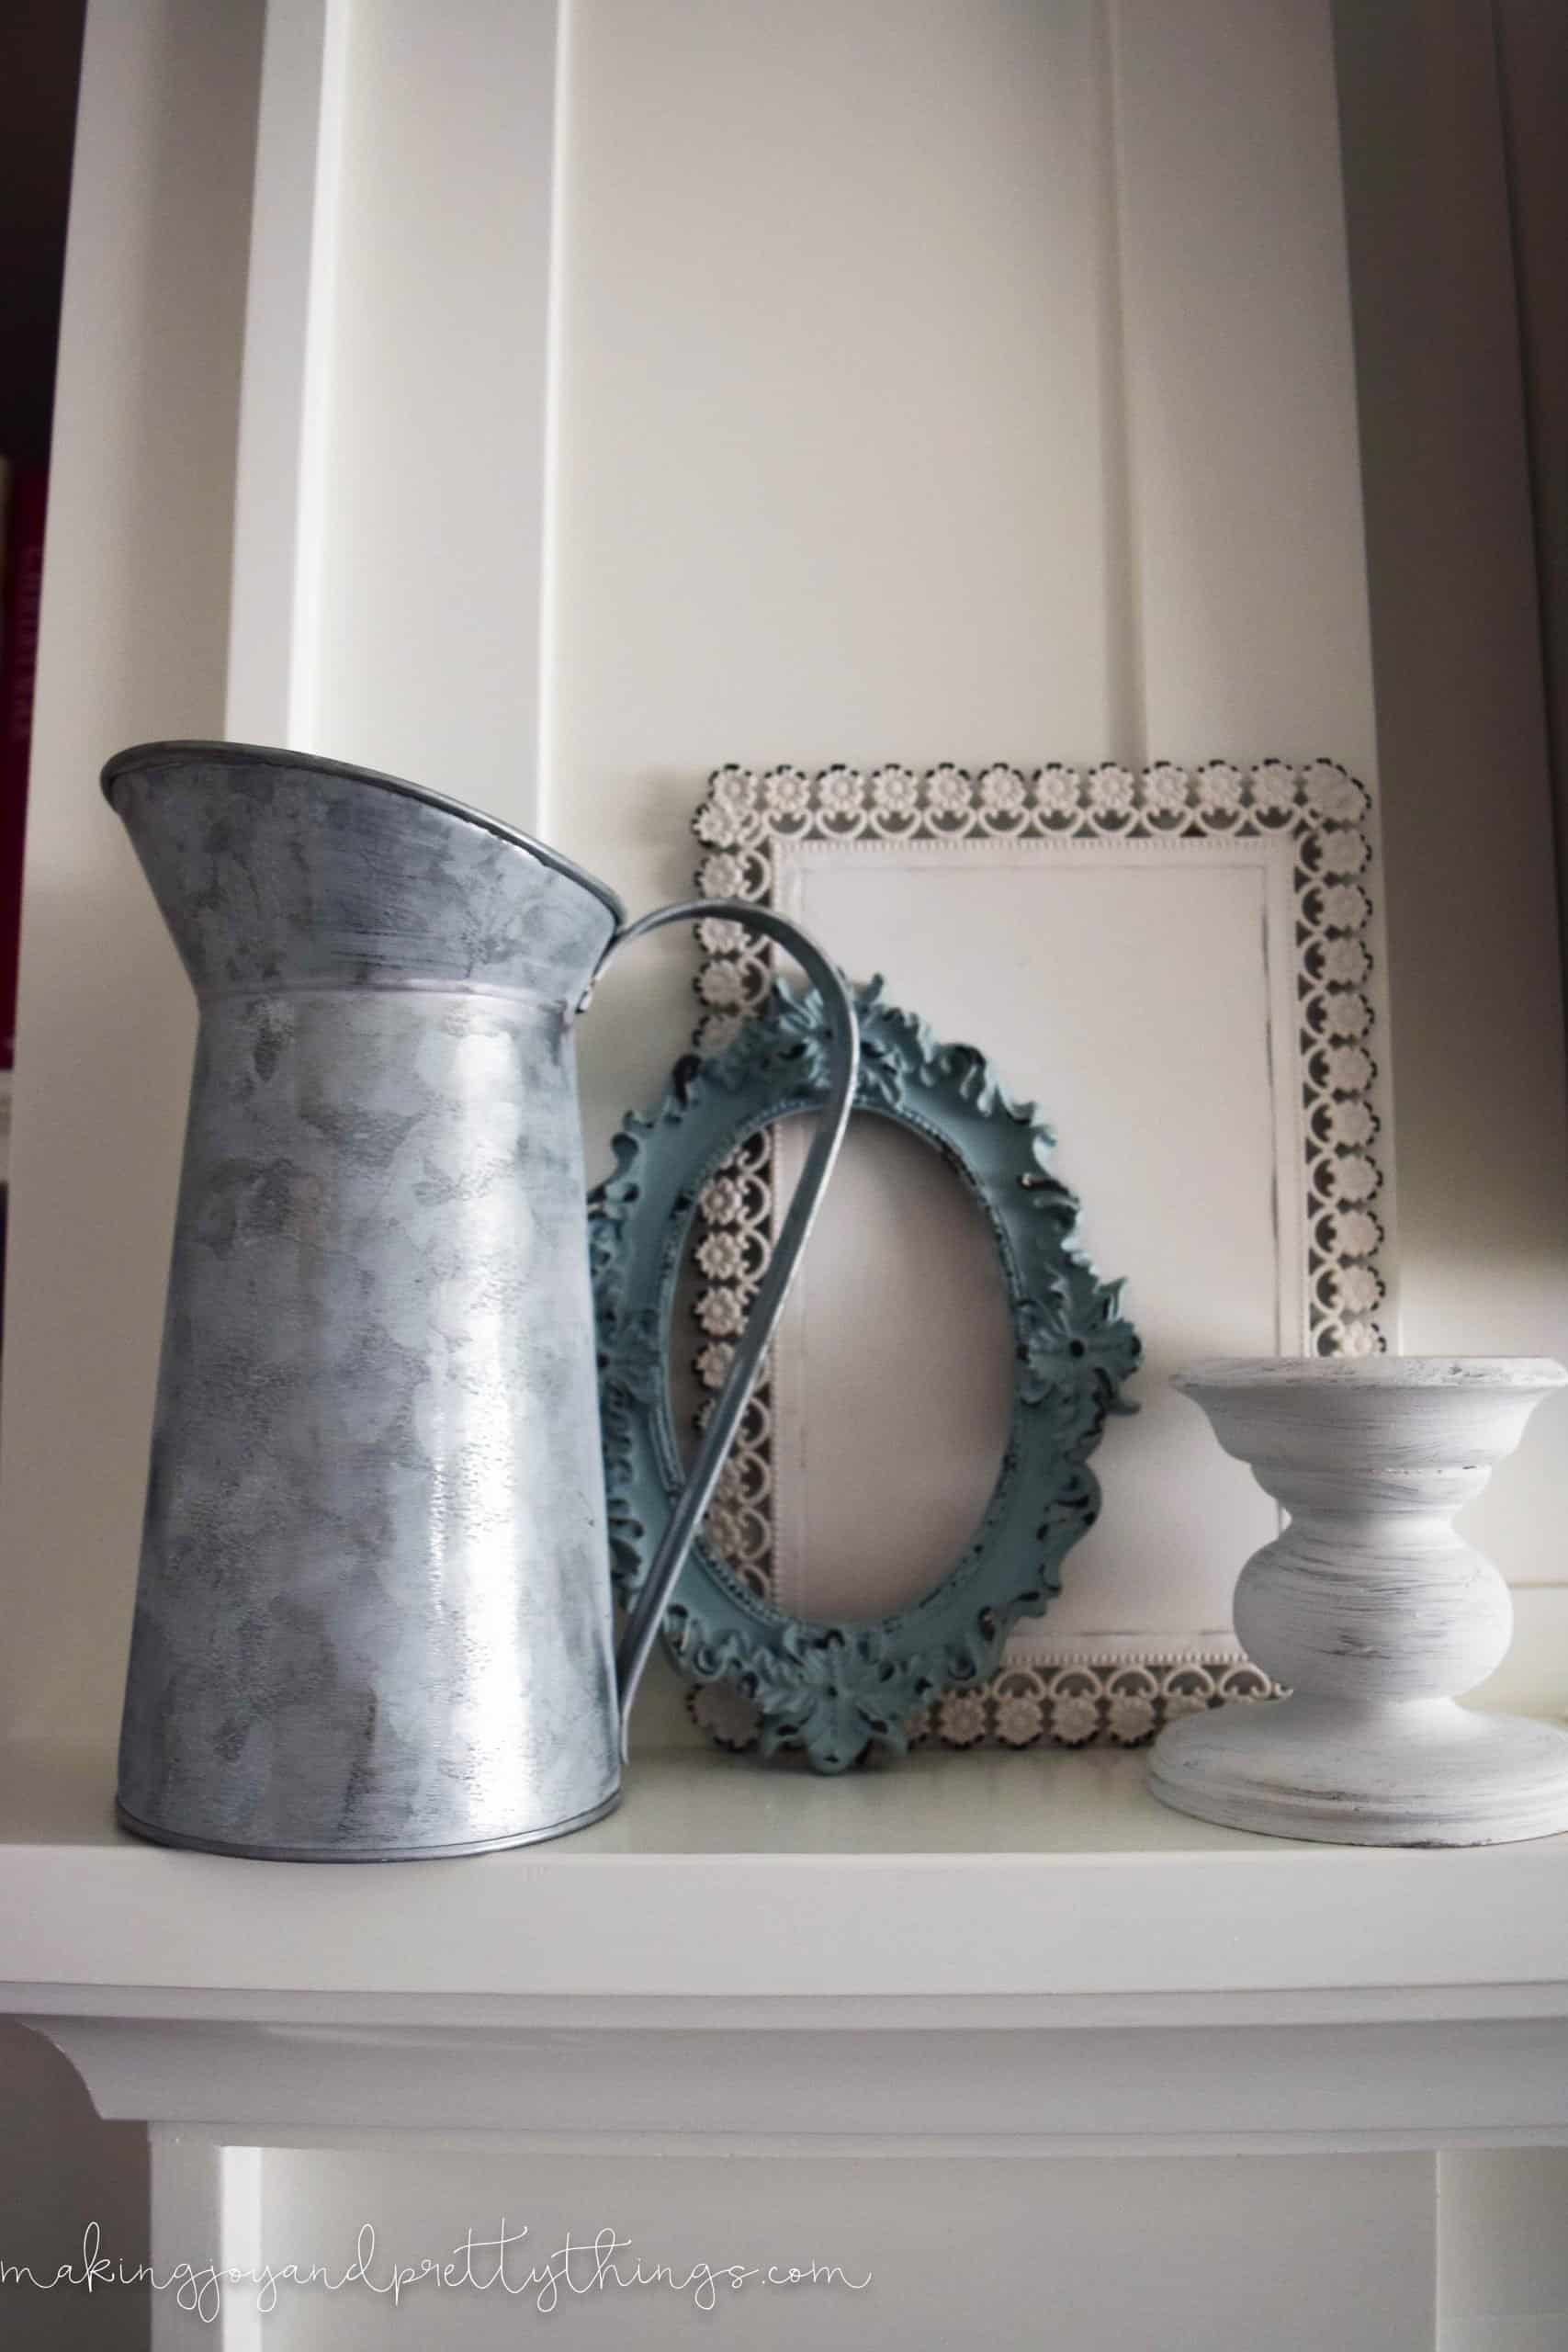 A galvanized metal pail stands next to two empty picture frames and a rustic white painted candle holder on a white fireplace mantle.